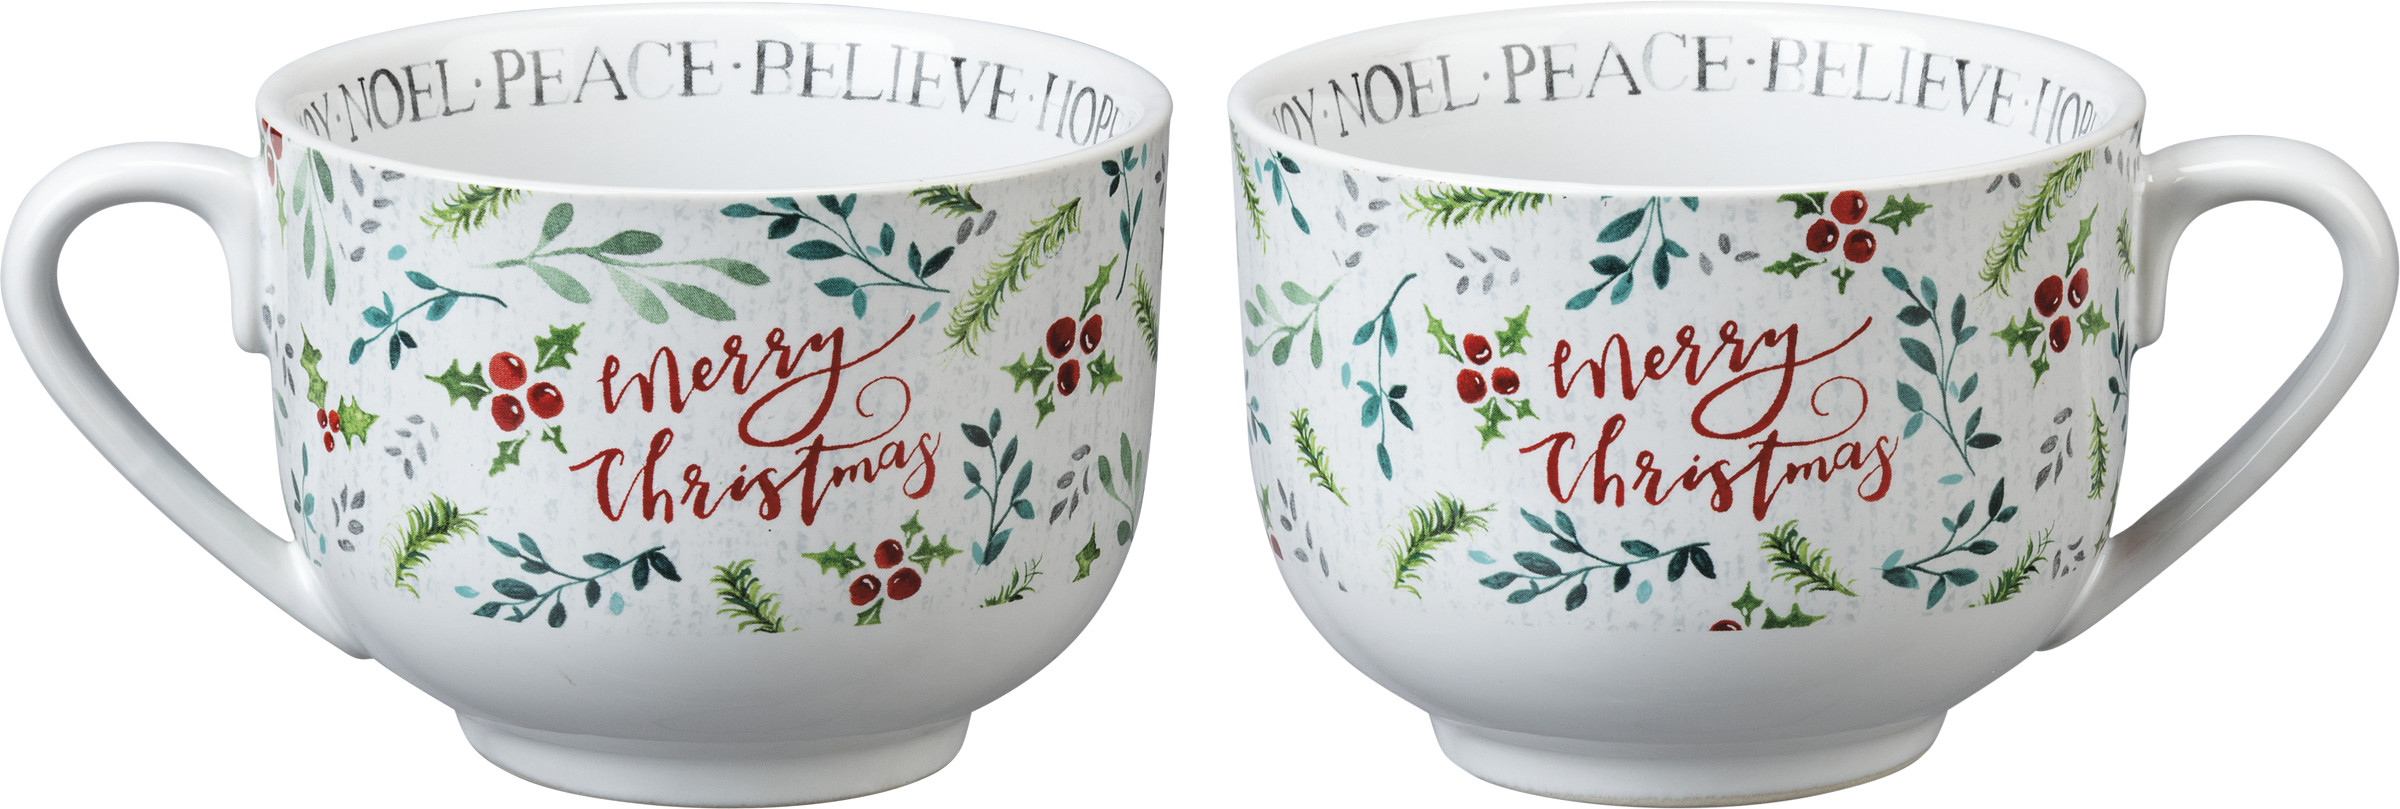 Primitives By Kathy 20 Ounce Merry Christmas/Let It Snow Mug Drinkware 35944